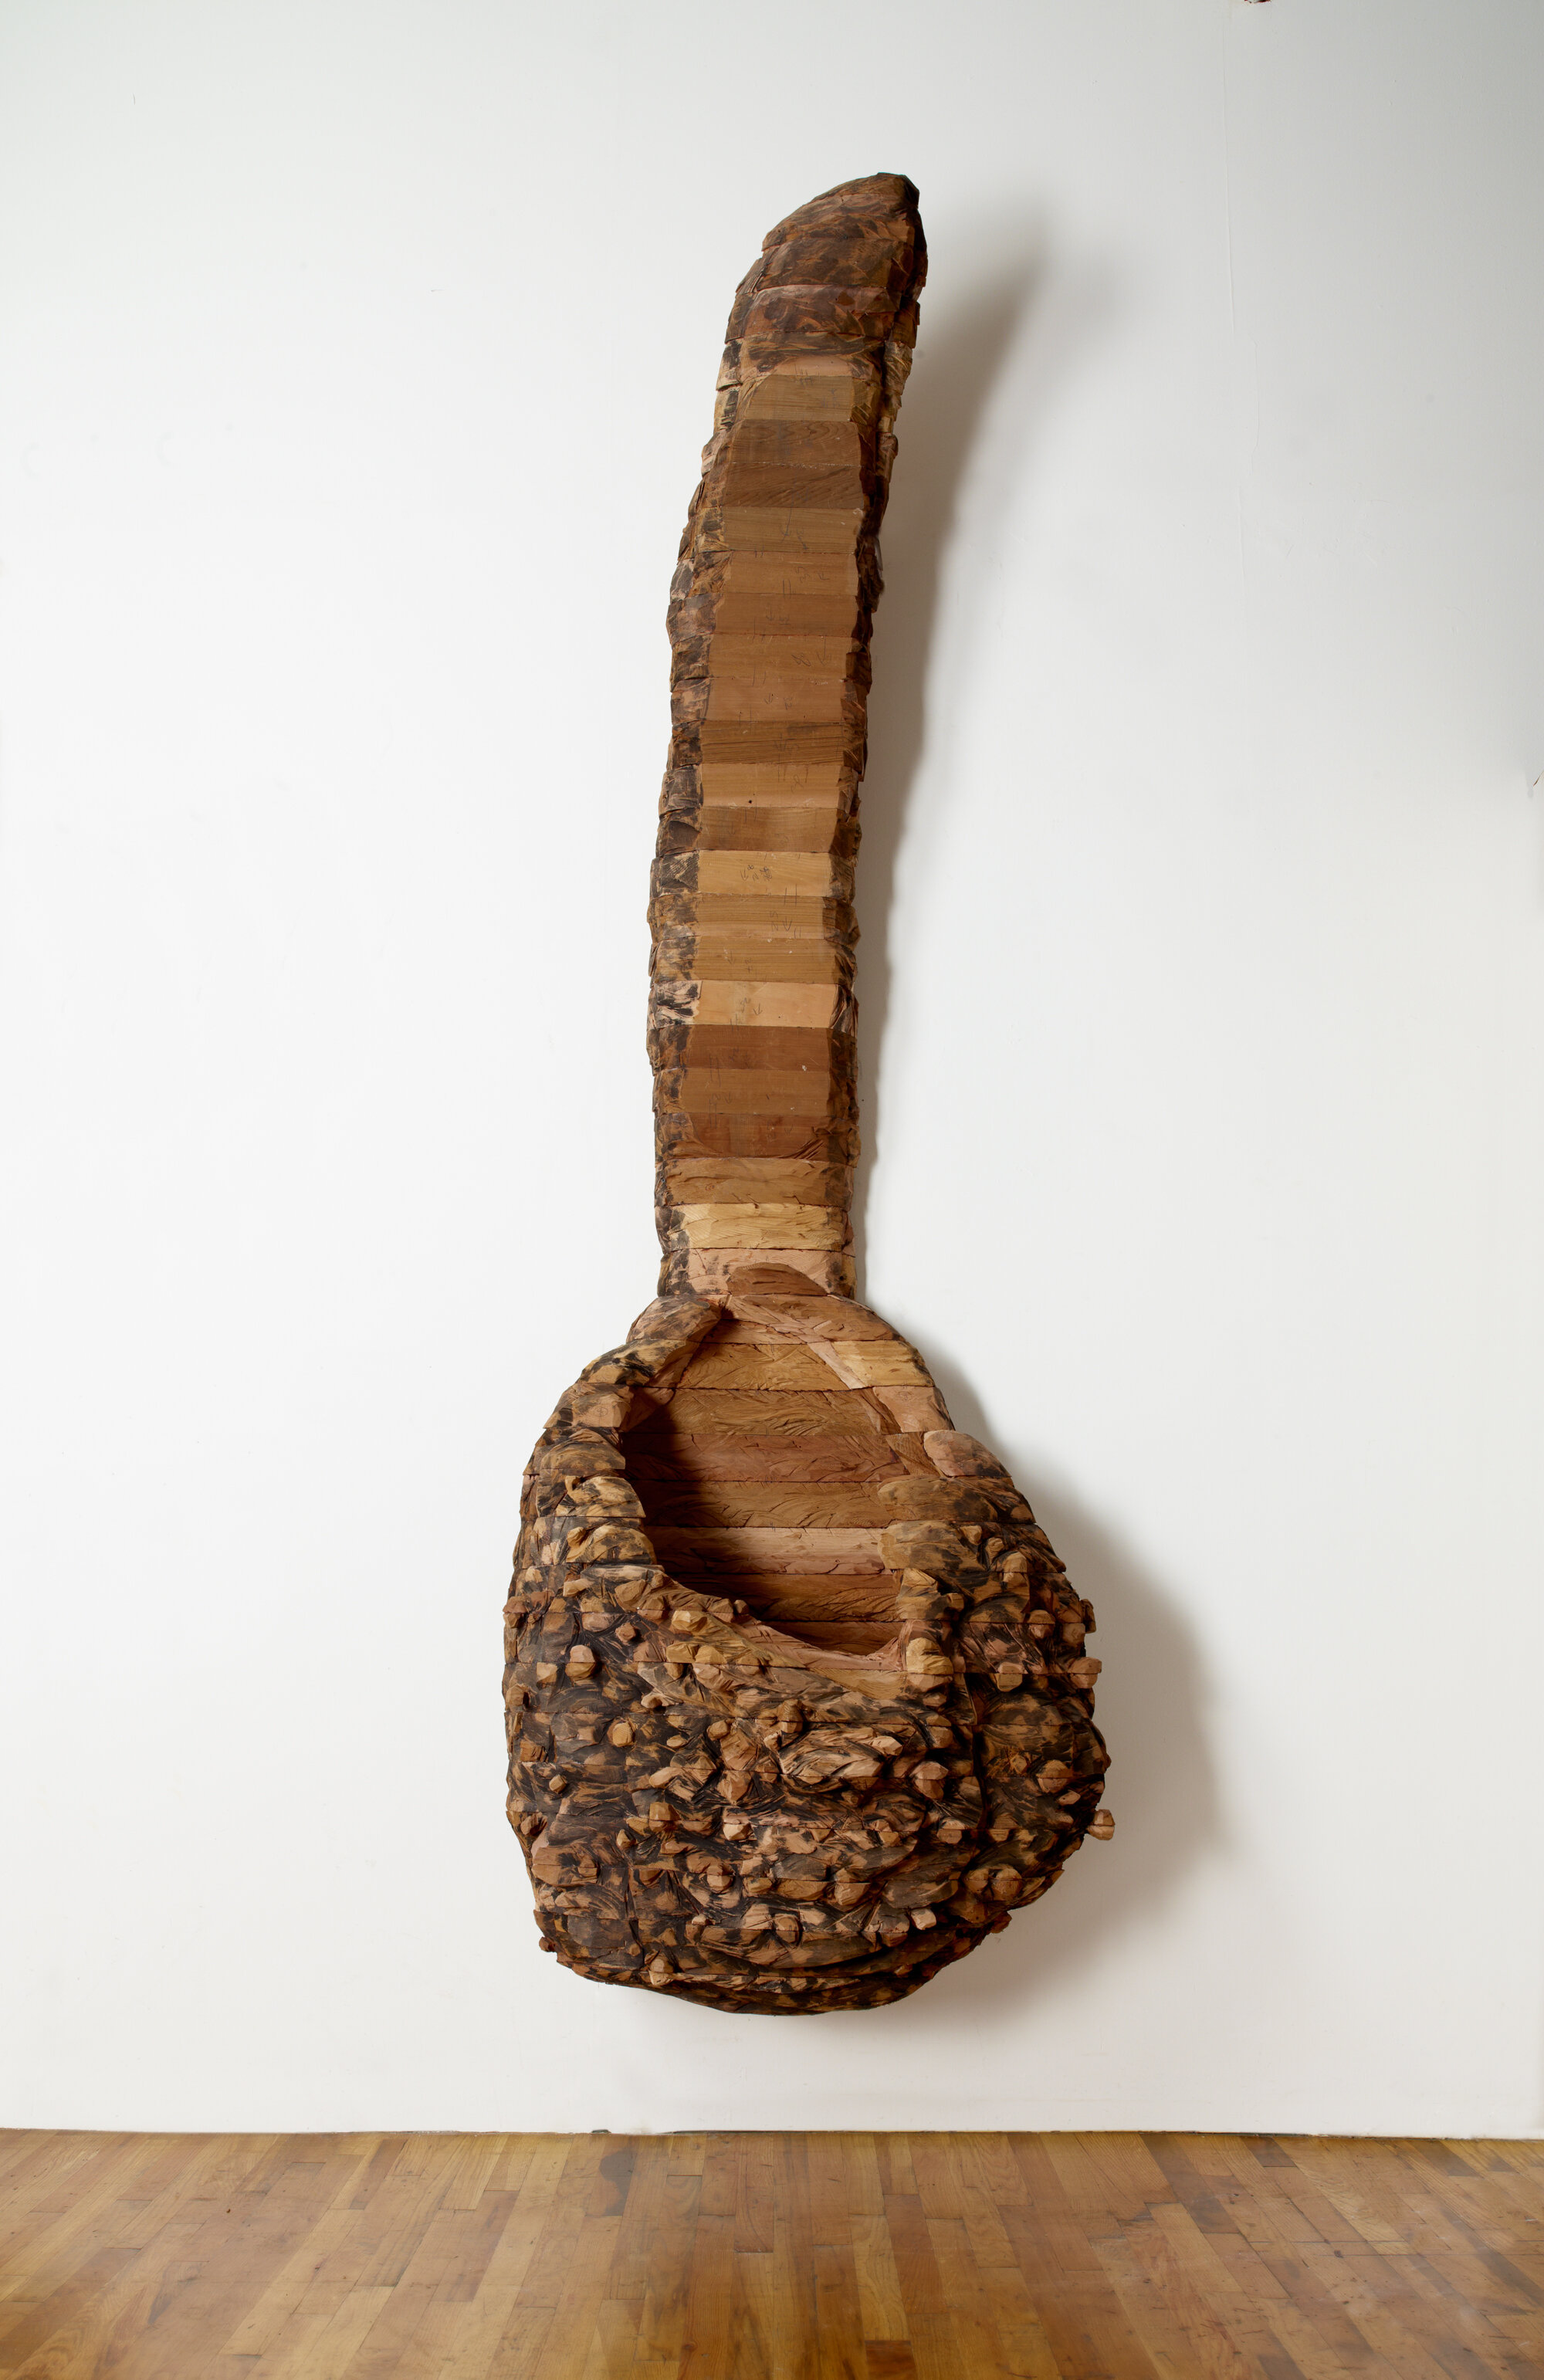       Spoon ladle , 2011 Cedar and pigment 130 x 41 x 17 in.    MORE IMAGES   Galerie Lelong &amp; Co.  